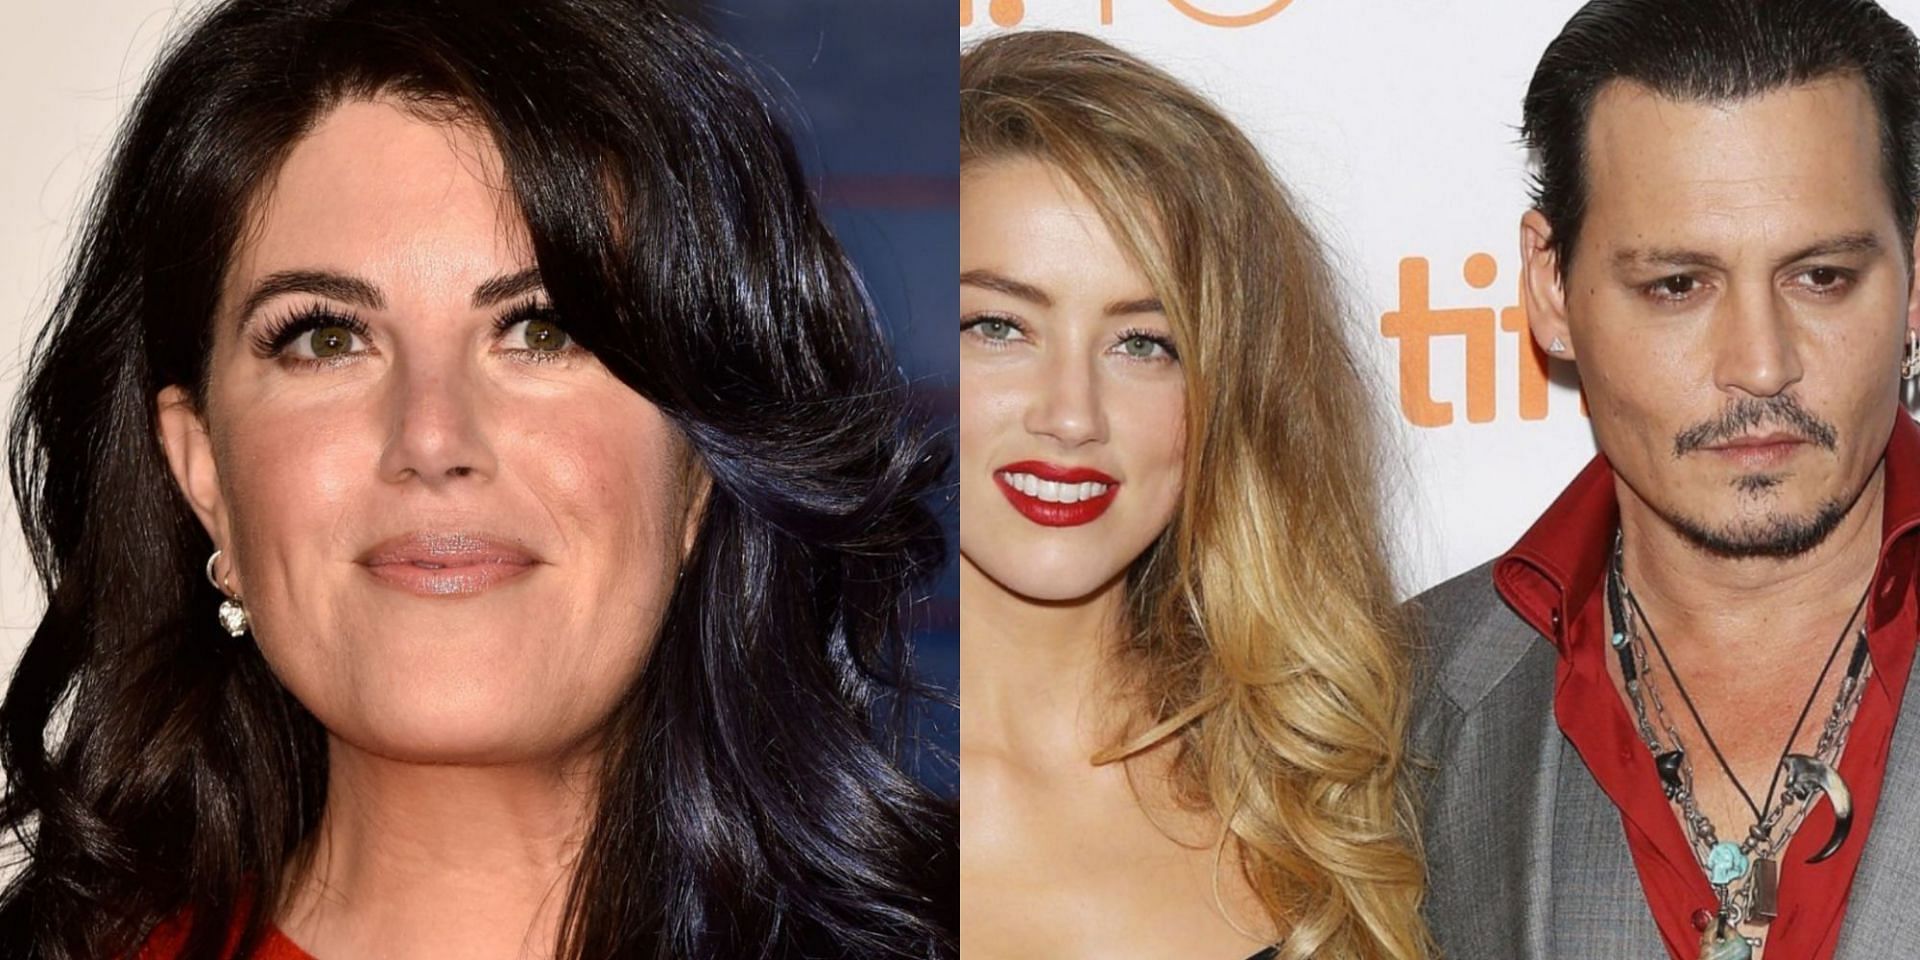 Monica Lewinsky said &quot;we are all guilty&quot; in Johnny Depp vs. Amber Heard trial (Image via Getty Images)